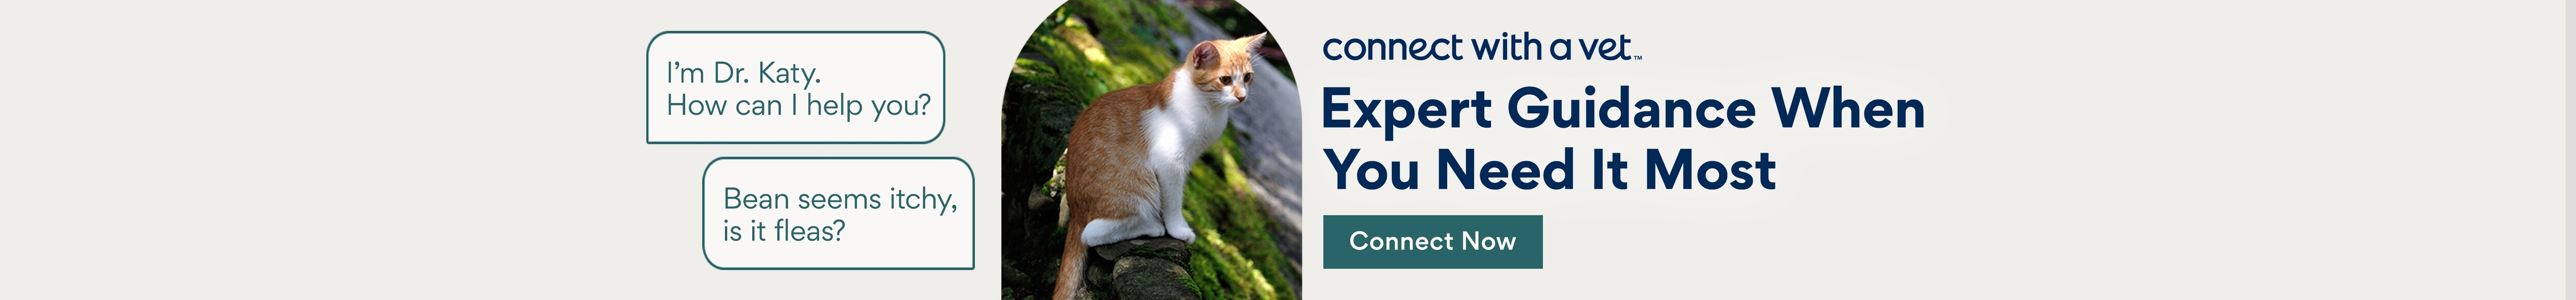 Expert Guidance When You Need it Most. Connect Now.